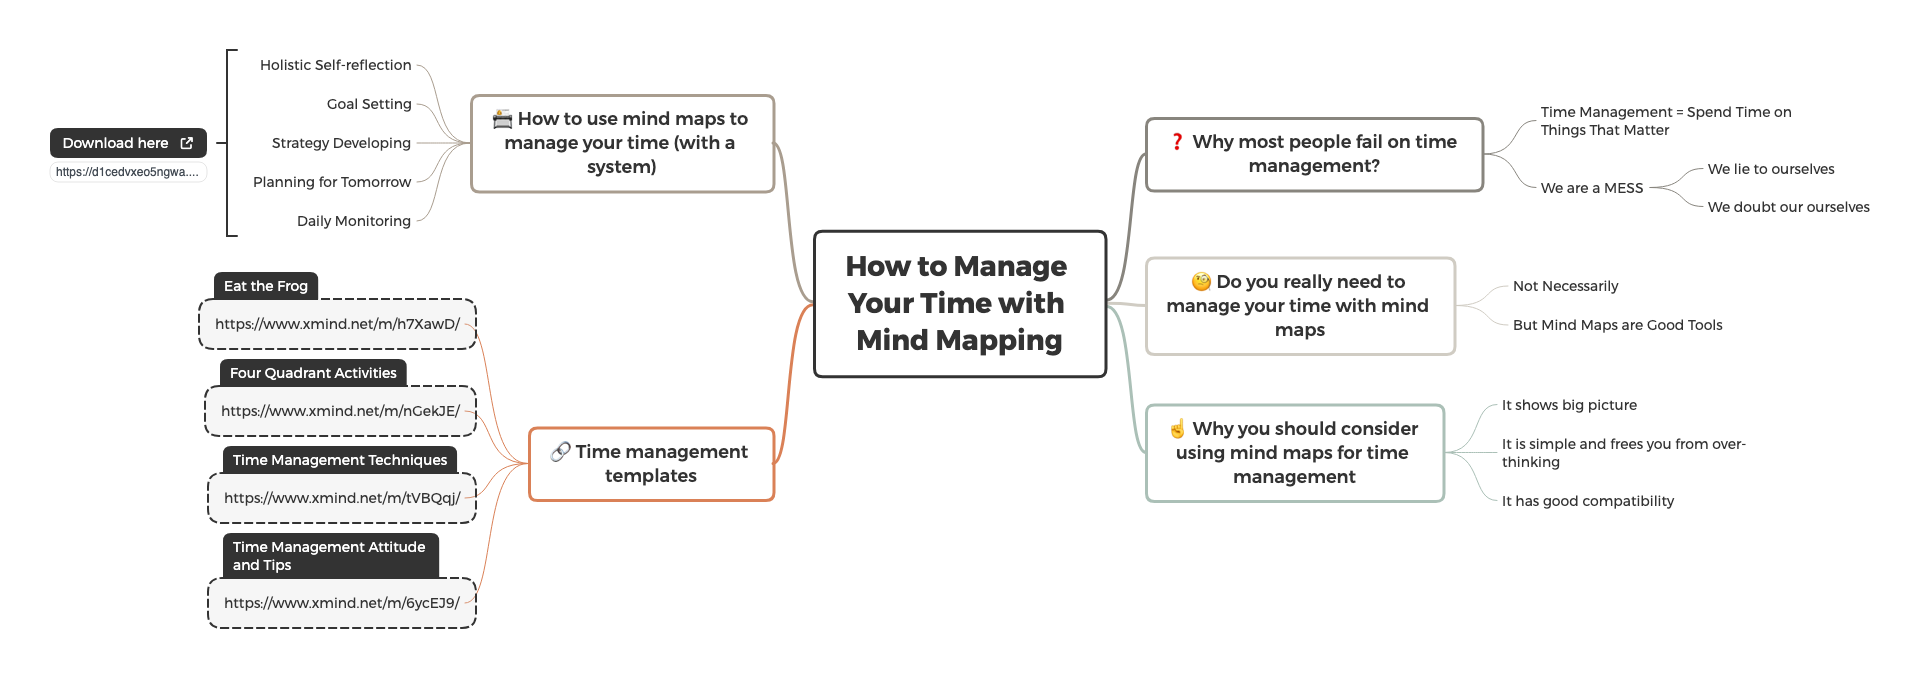  - Why do most people fail on time management? - Do you really need to manage your time with mind maps - Why you should consider using mind maps for time management - How to use mind maps to manage your time (with a system) - Time management templates